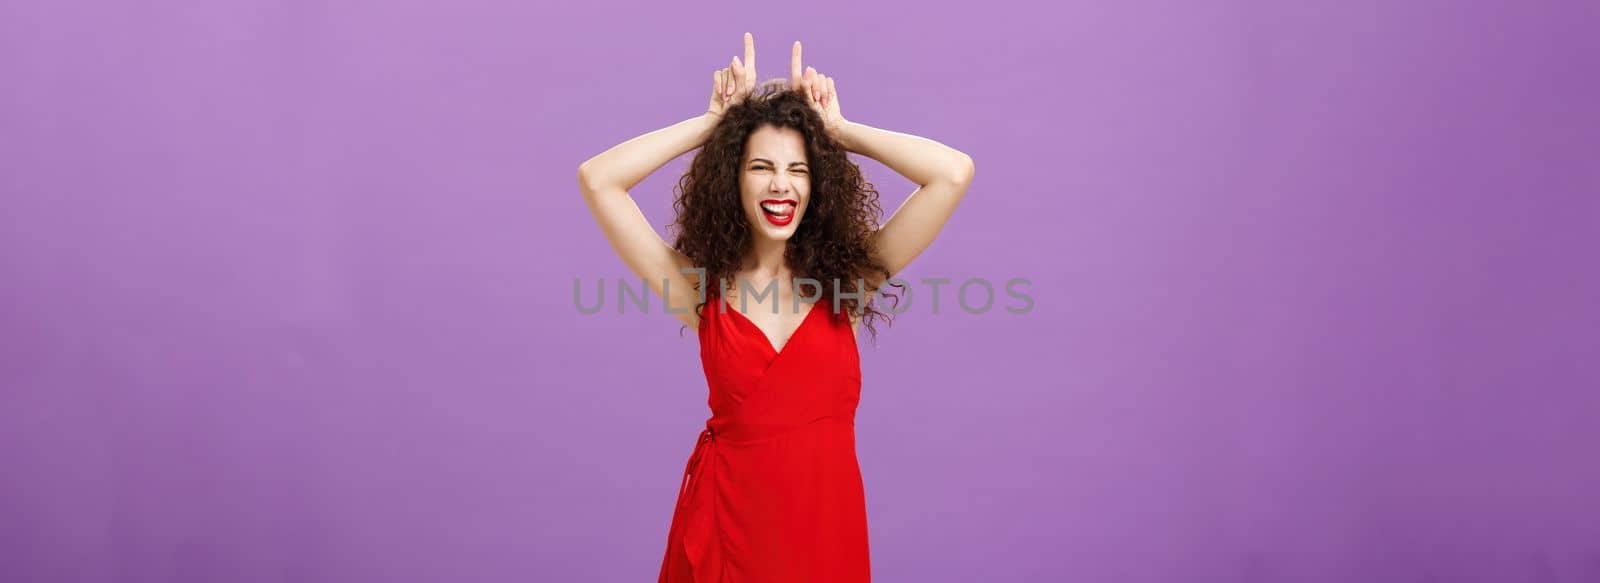 Devil lives inside lady. Daring stylish adult woman with curly hairstyle in red evening dress winking making confident and amused expression showing horns with index fingers on head, being stubborn.